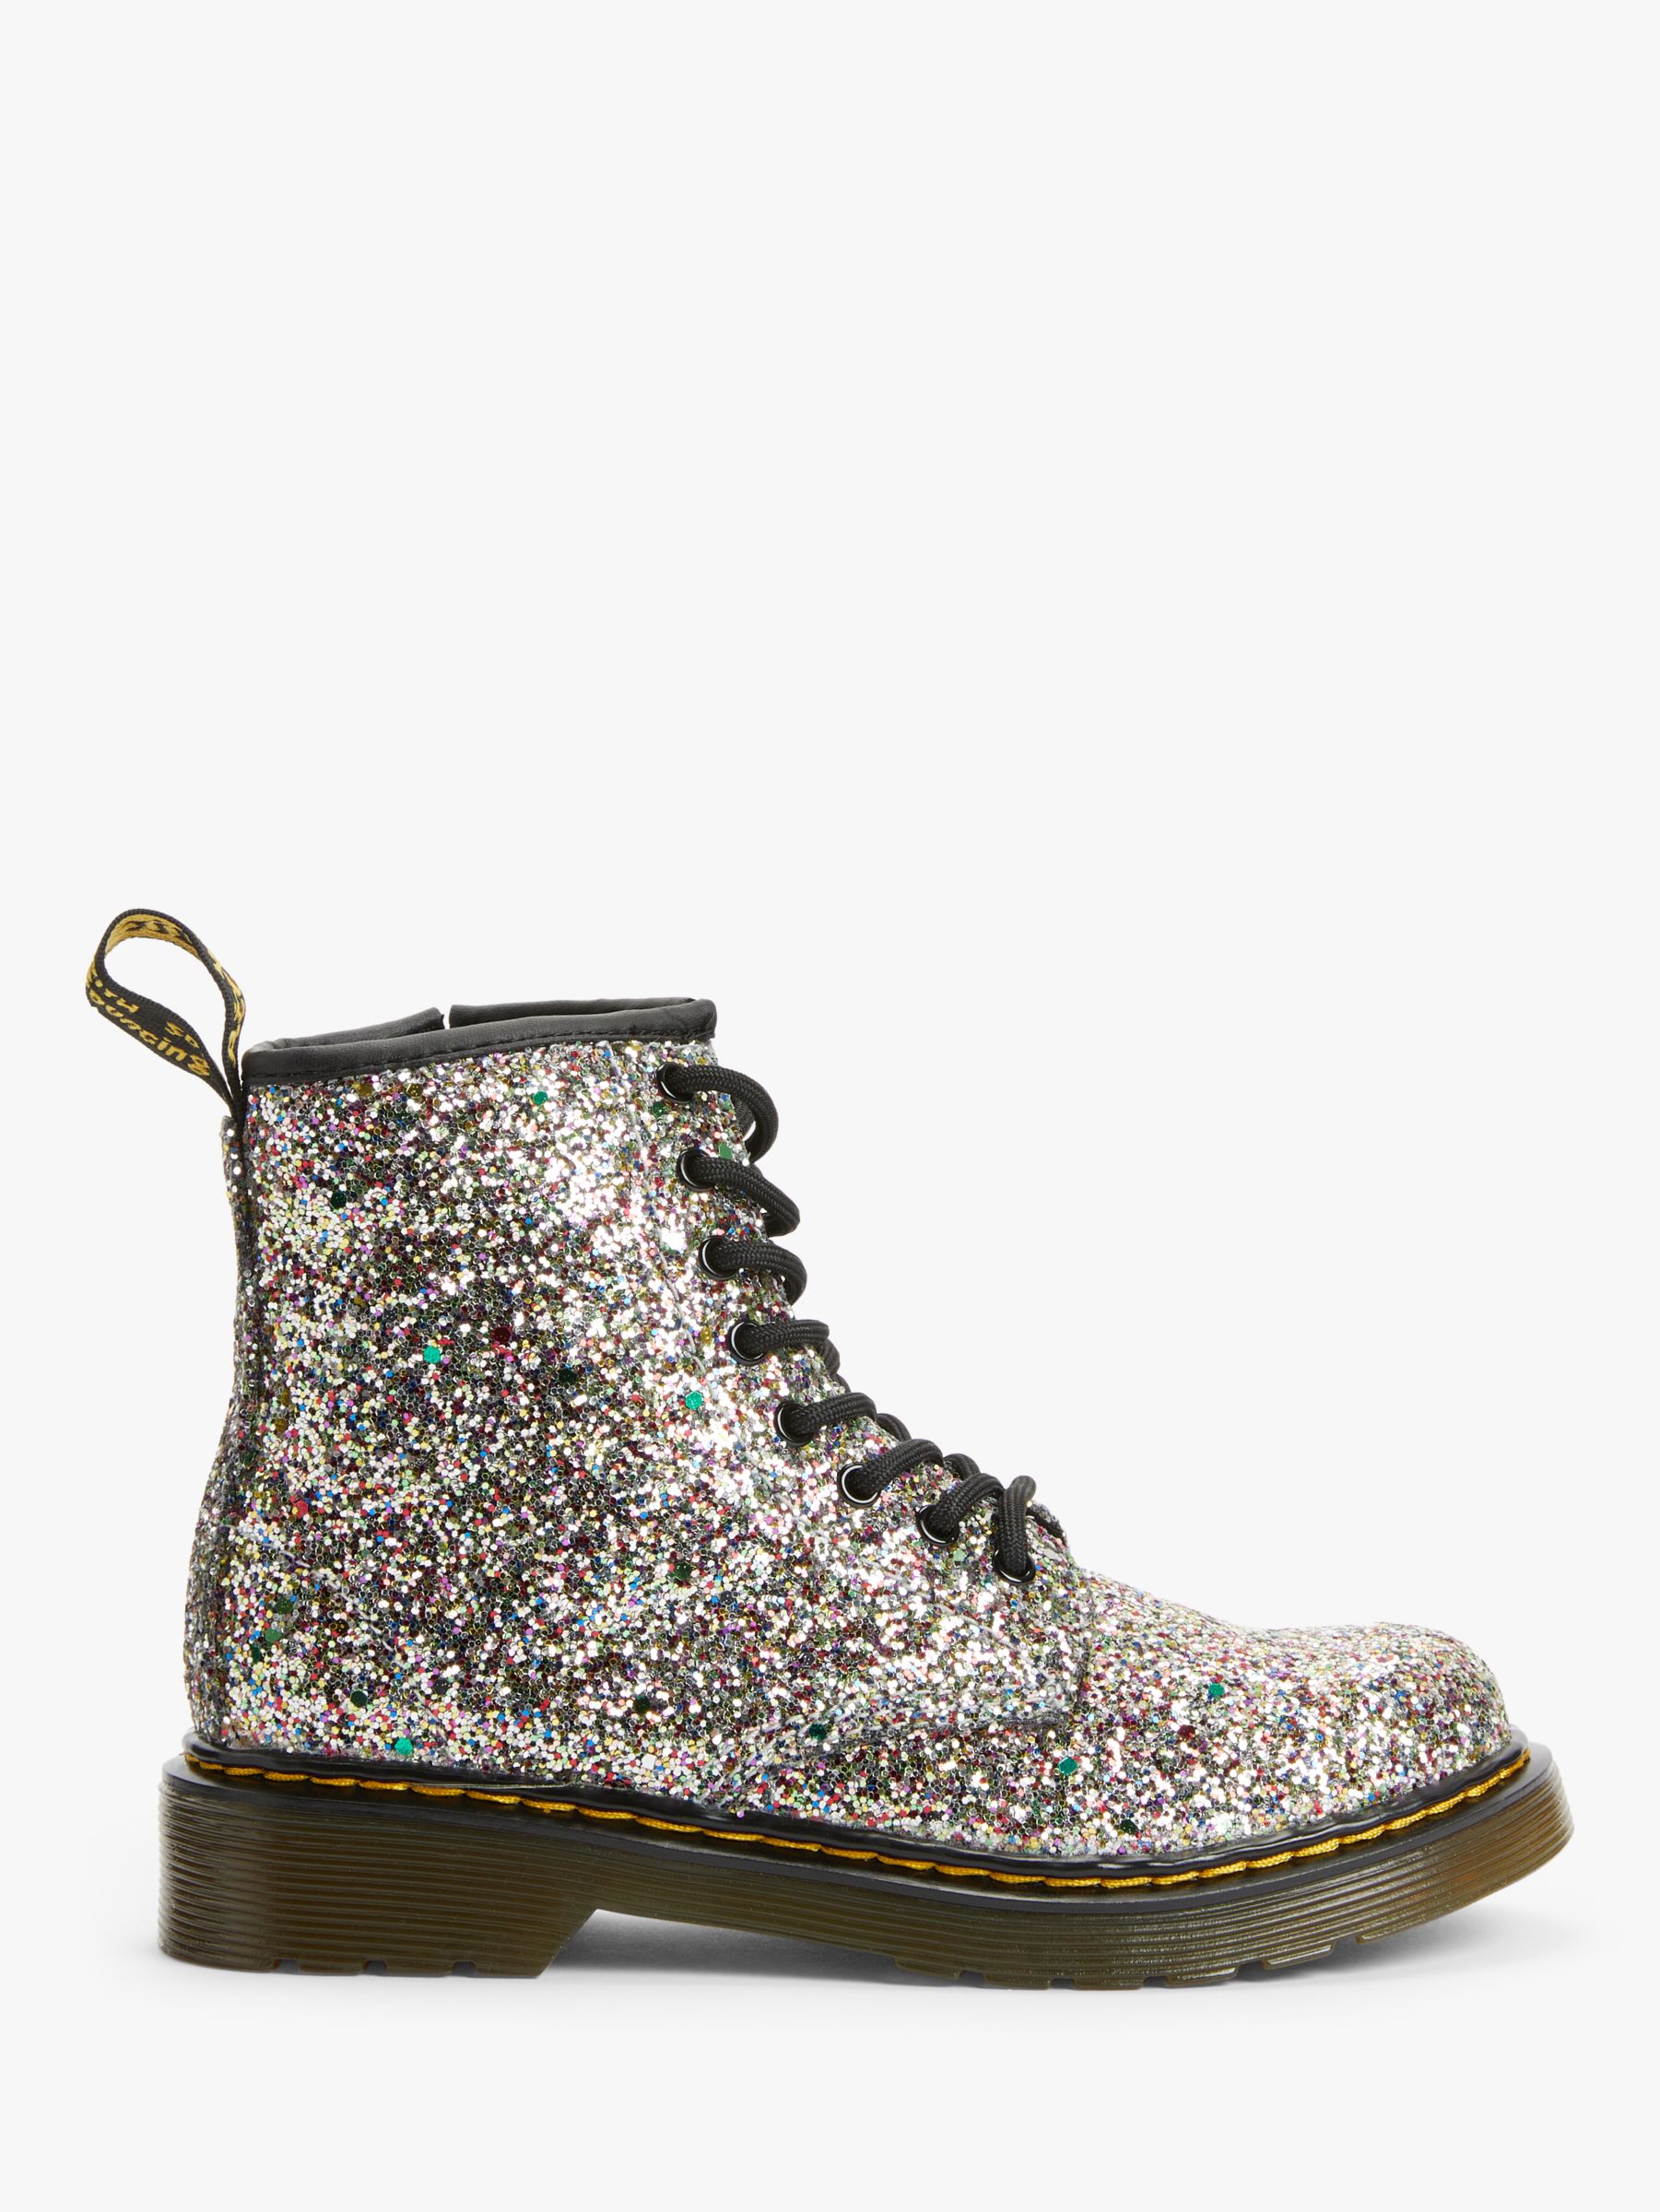 lace up glitter boots